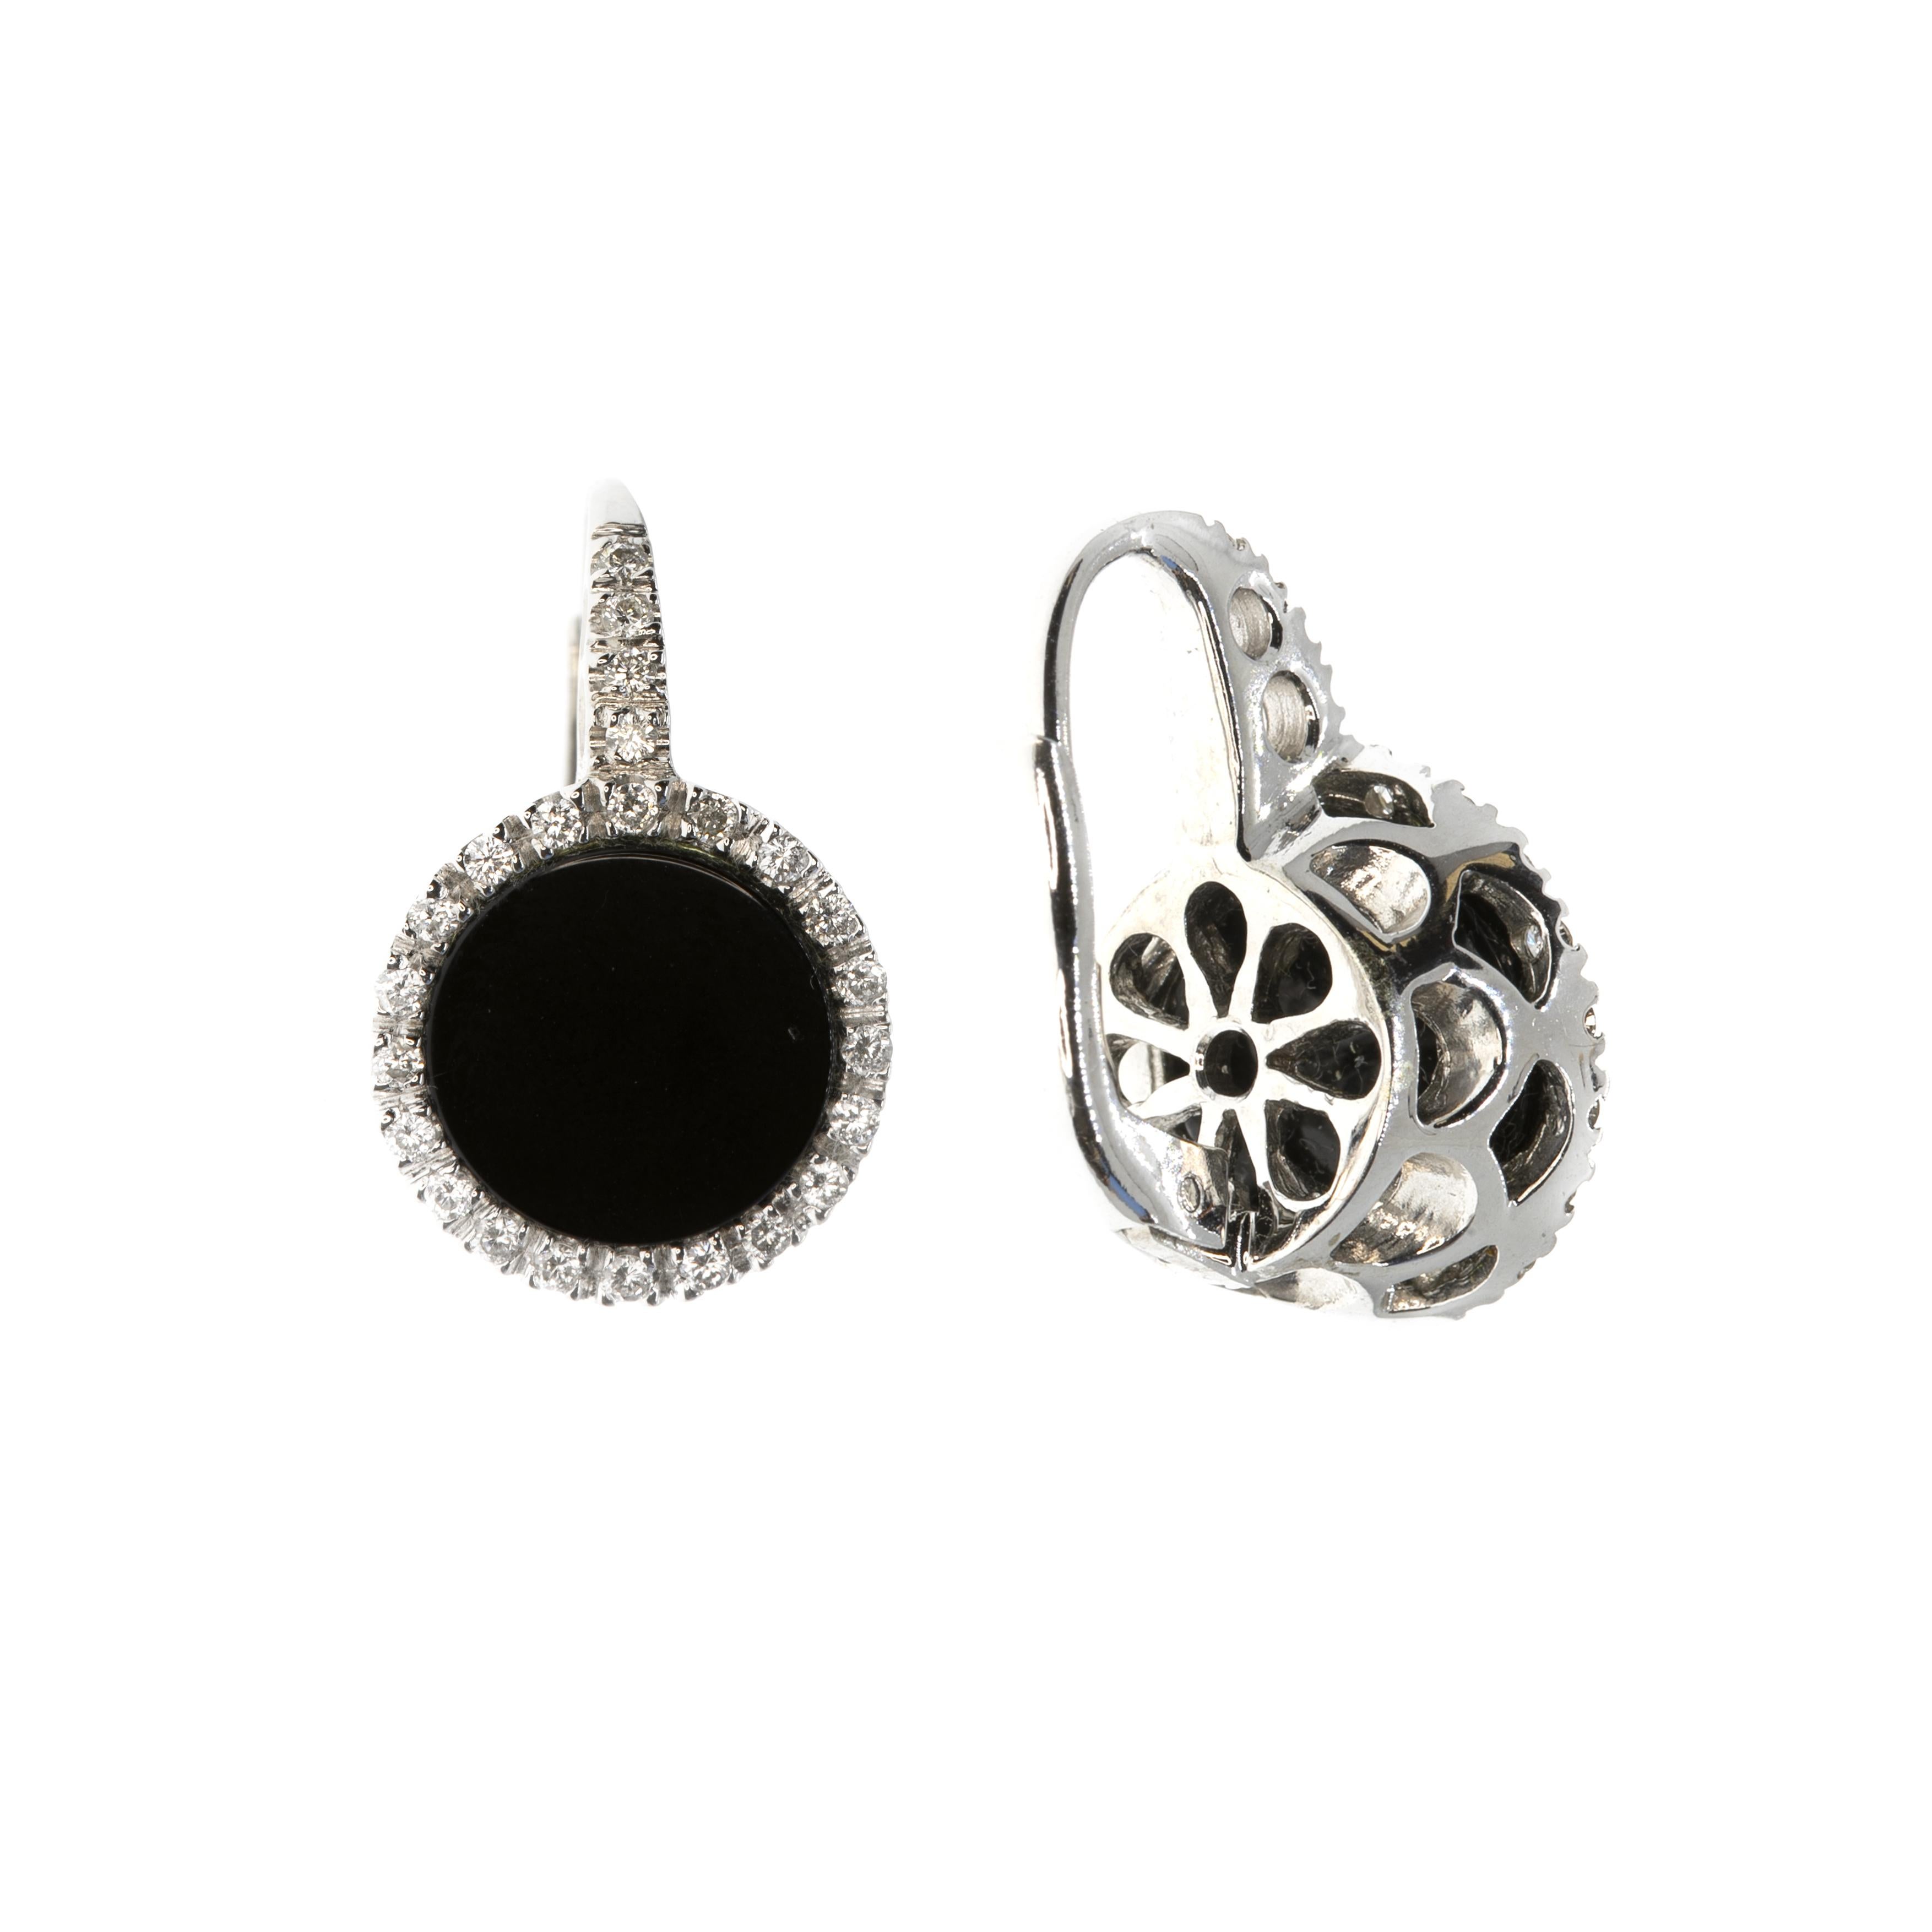 These earrings, masterfully created by hand from 18K white gold are each set with a large round onyx and a brilliant white diamond halo.

This is a delightful pair of earrings. They have bridge and spring clip backs and measure 13 mm across.